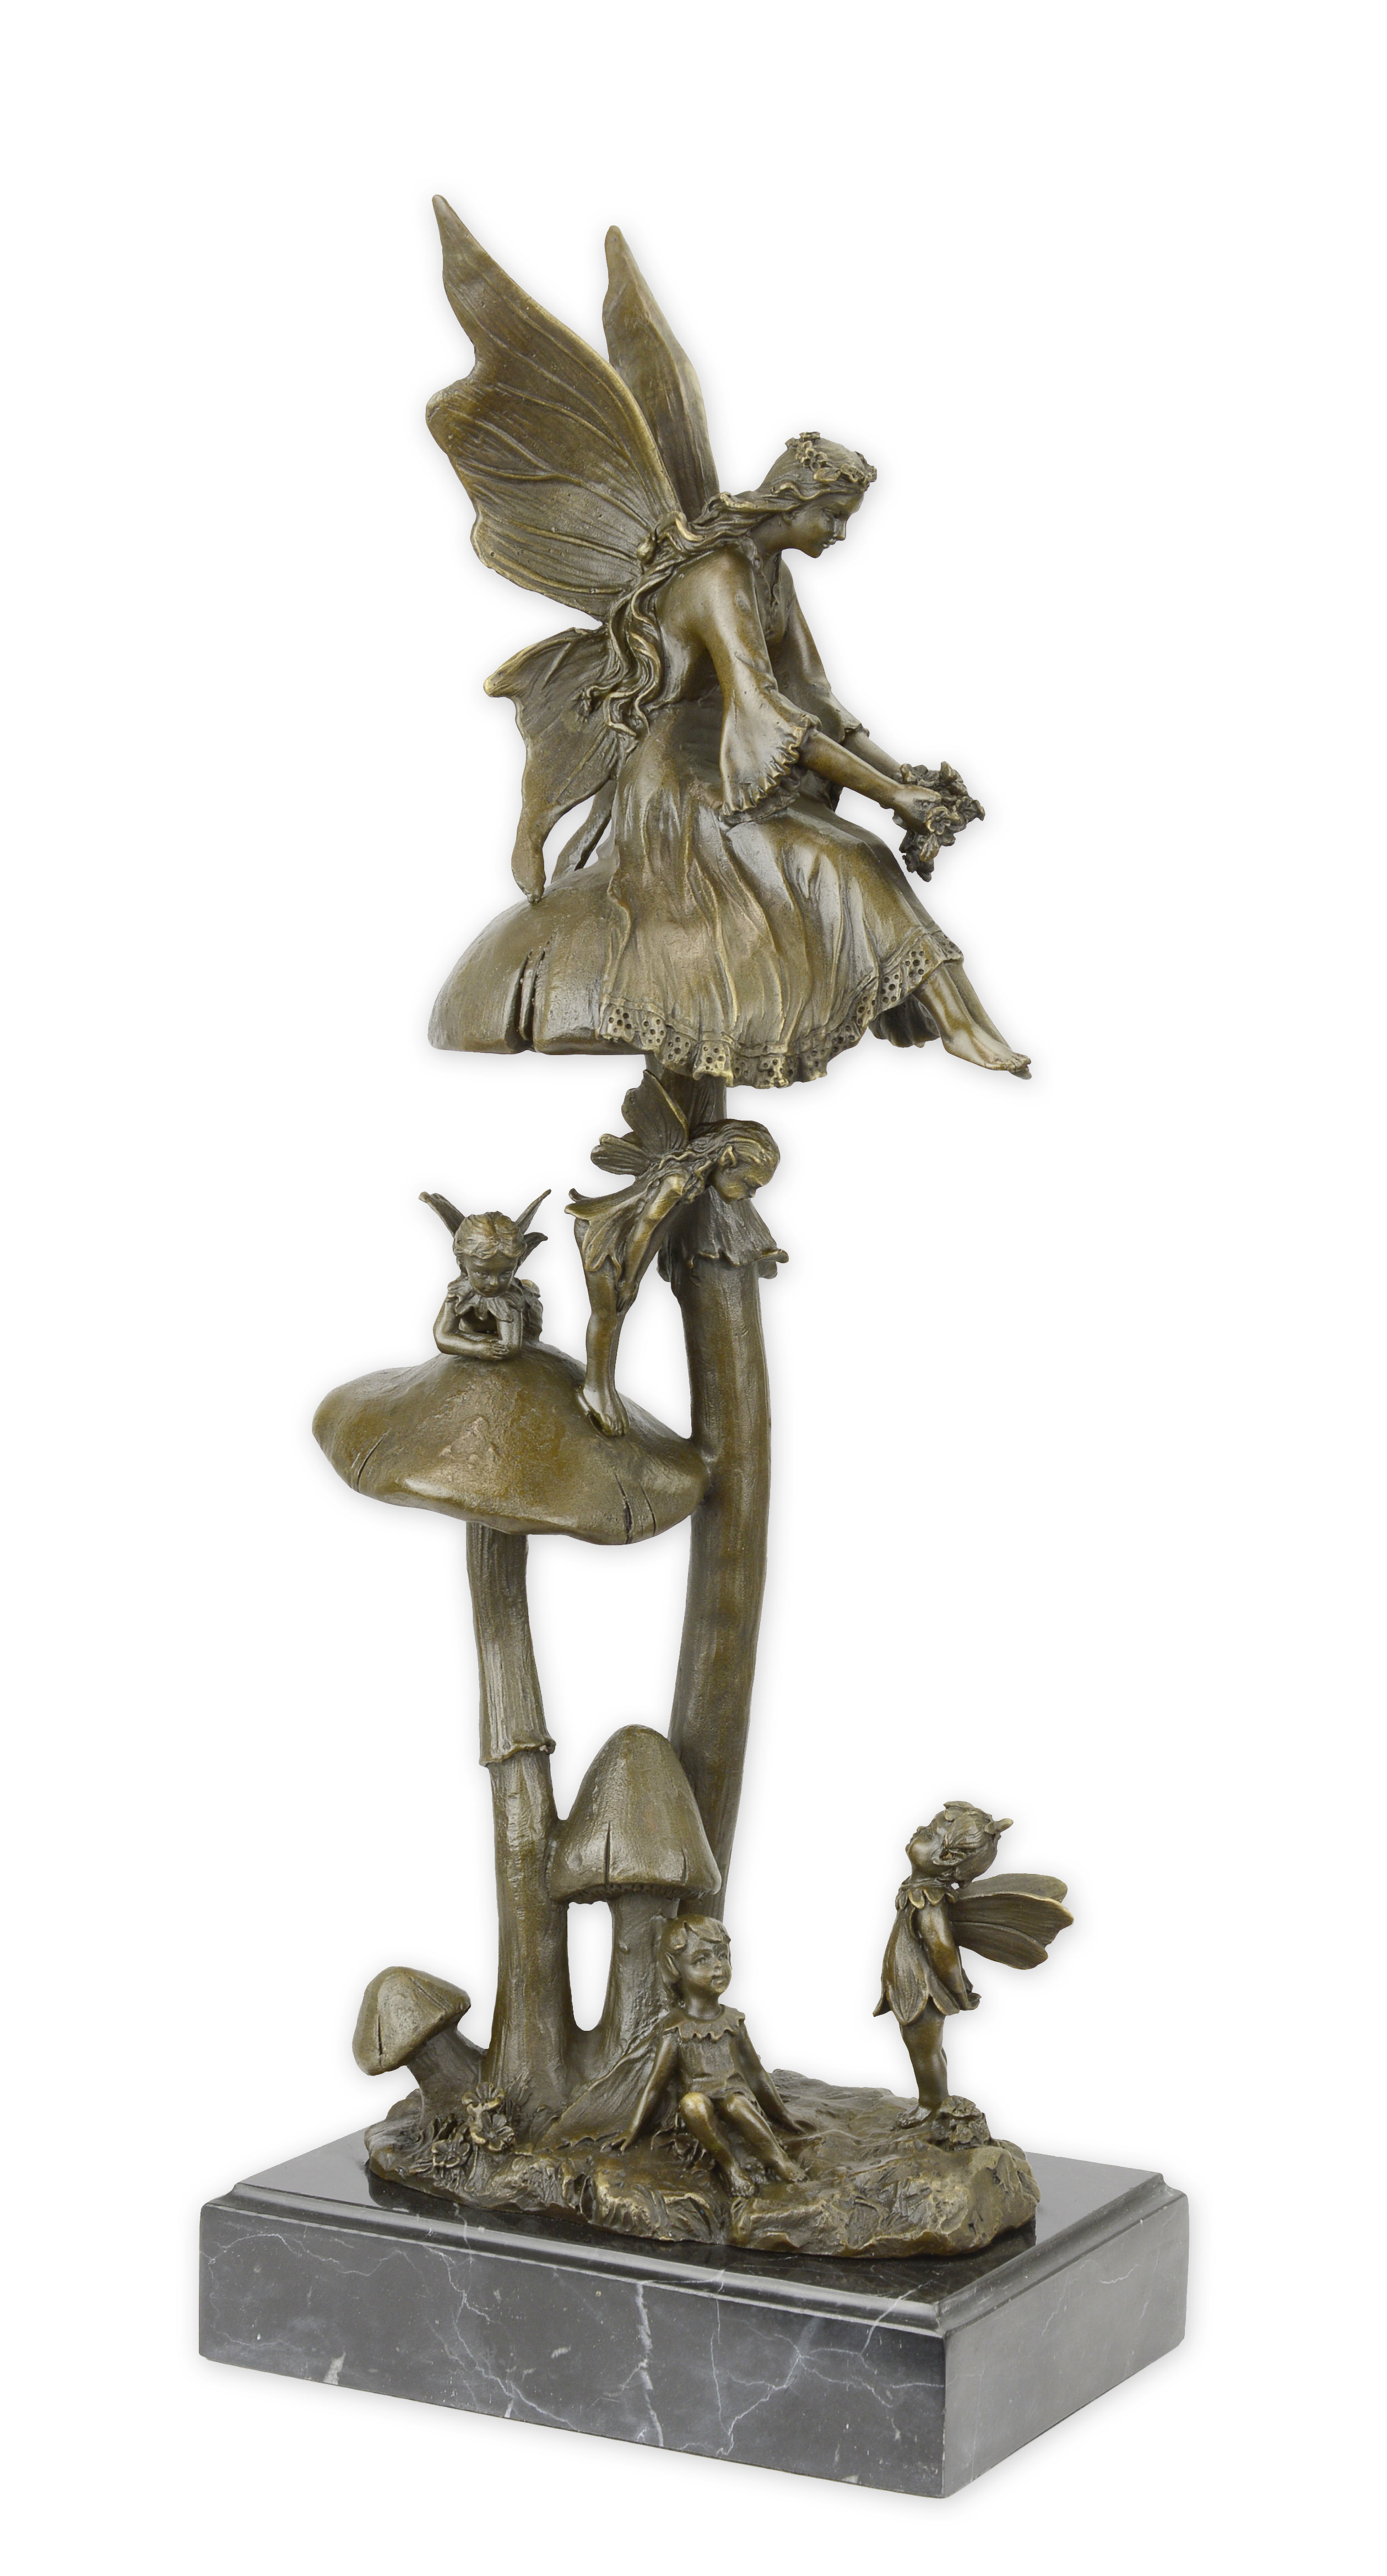 A BRONZE SCULPTURE OF A GROUP OF FAIRIES RESTING ON MUSHROOM